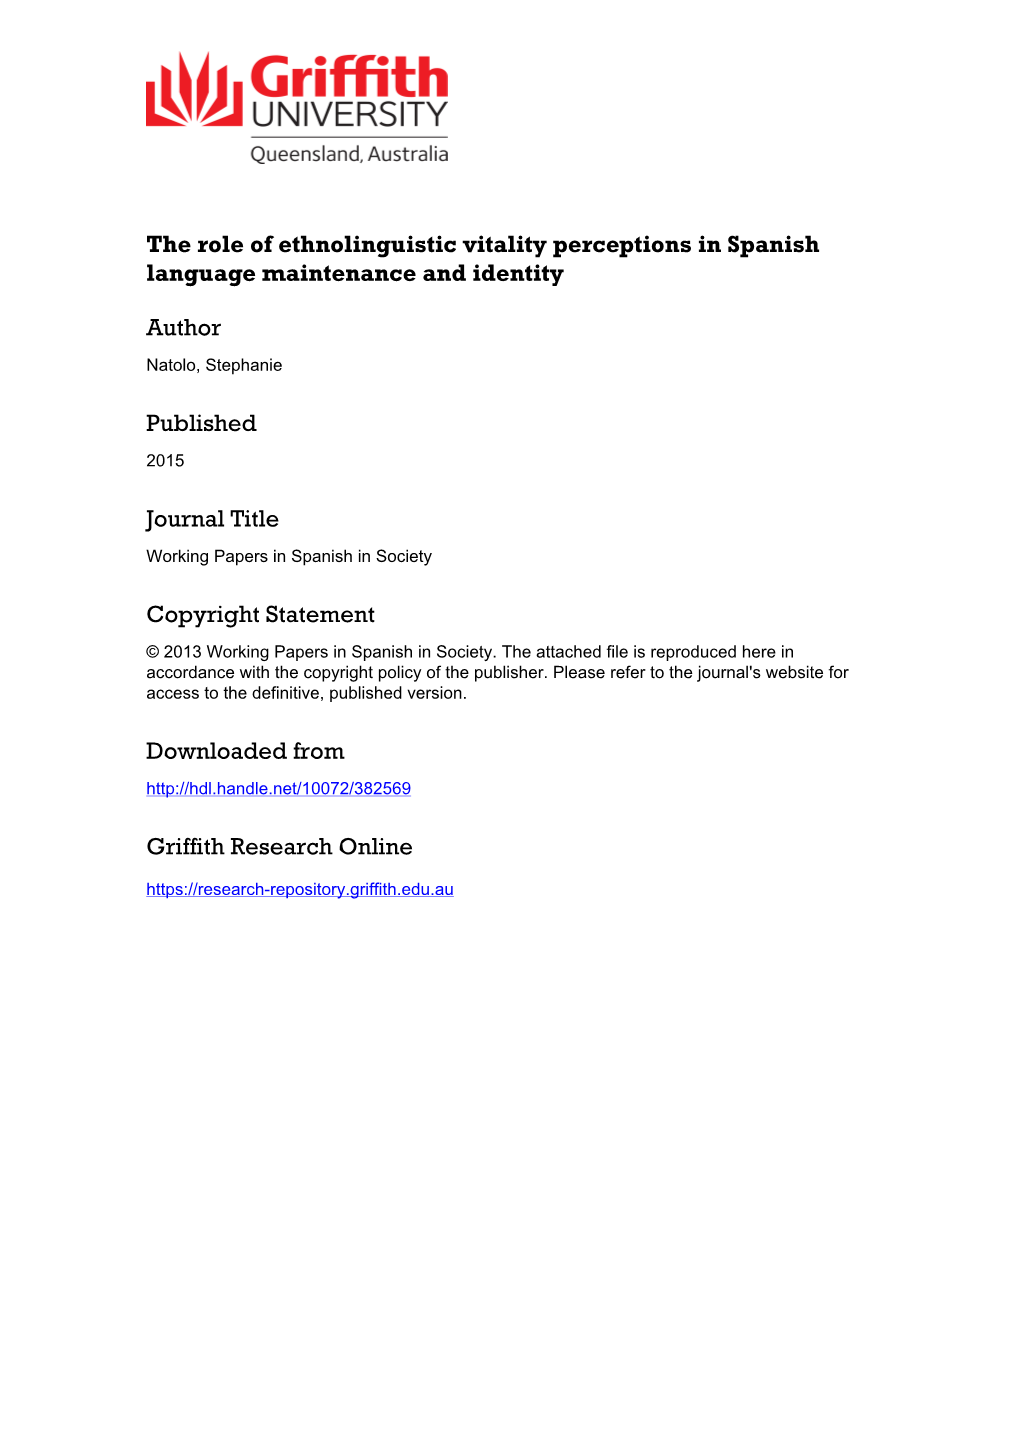 The Role of Ethnolinguistic Vitality Perceptions in Spanish Language Maintenance and Identity Stephanie CHARLEEN NATOLO Griffith